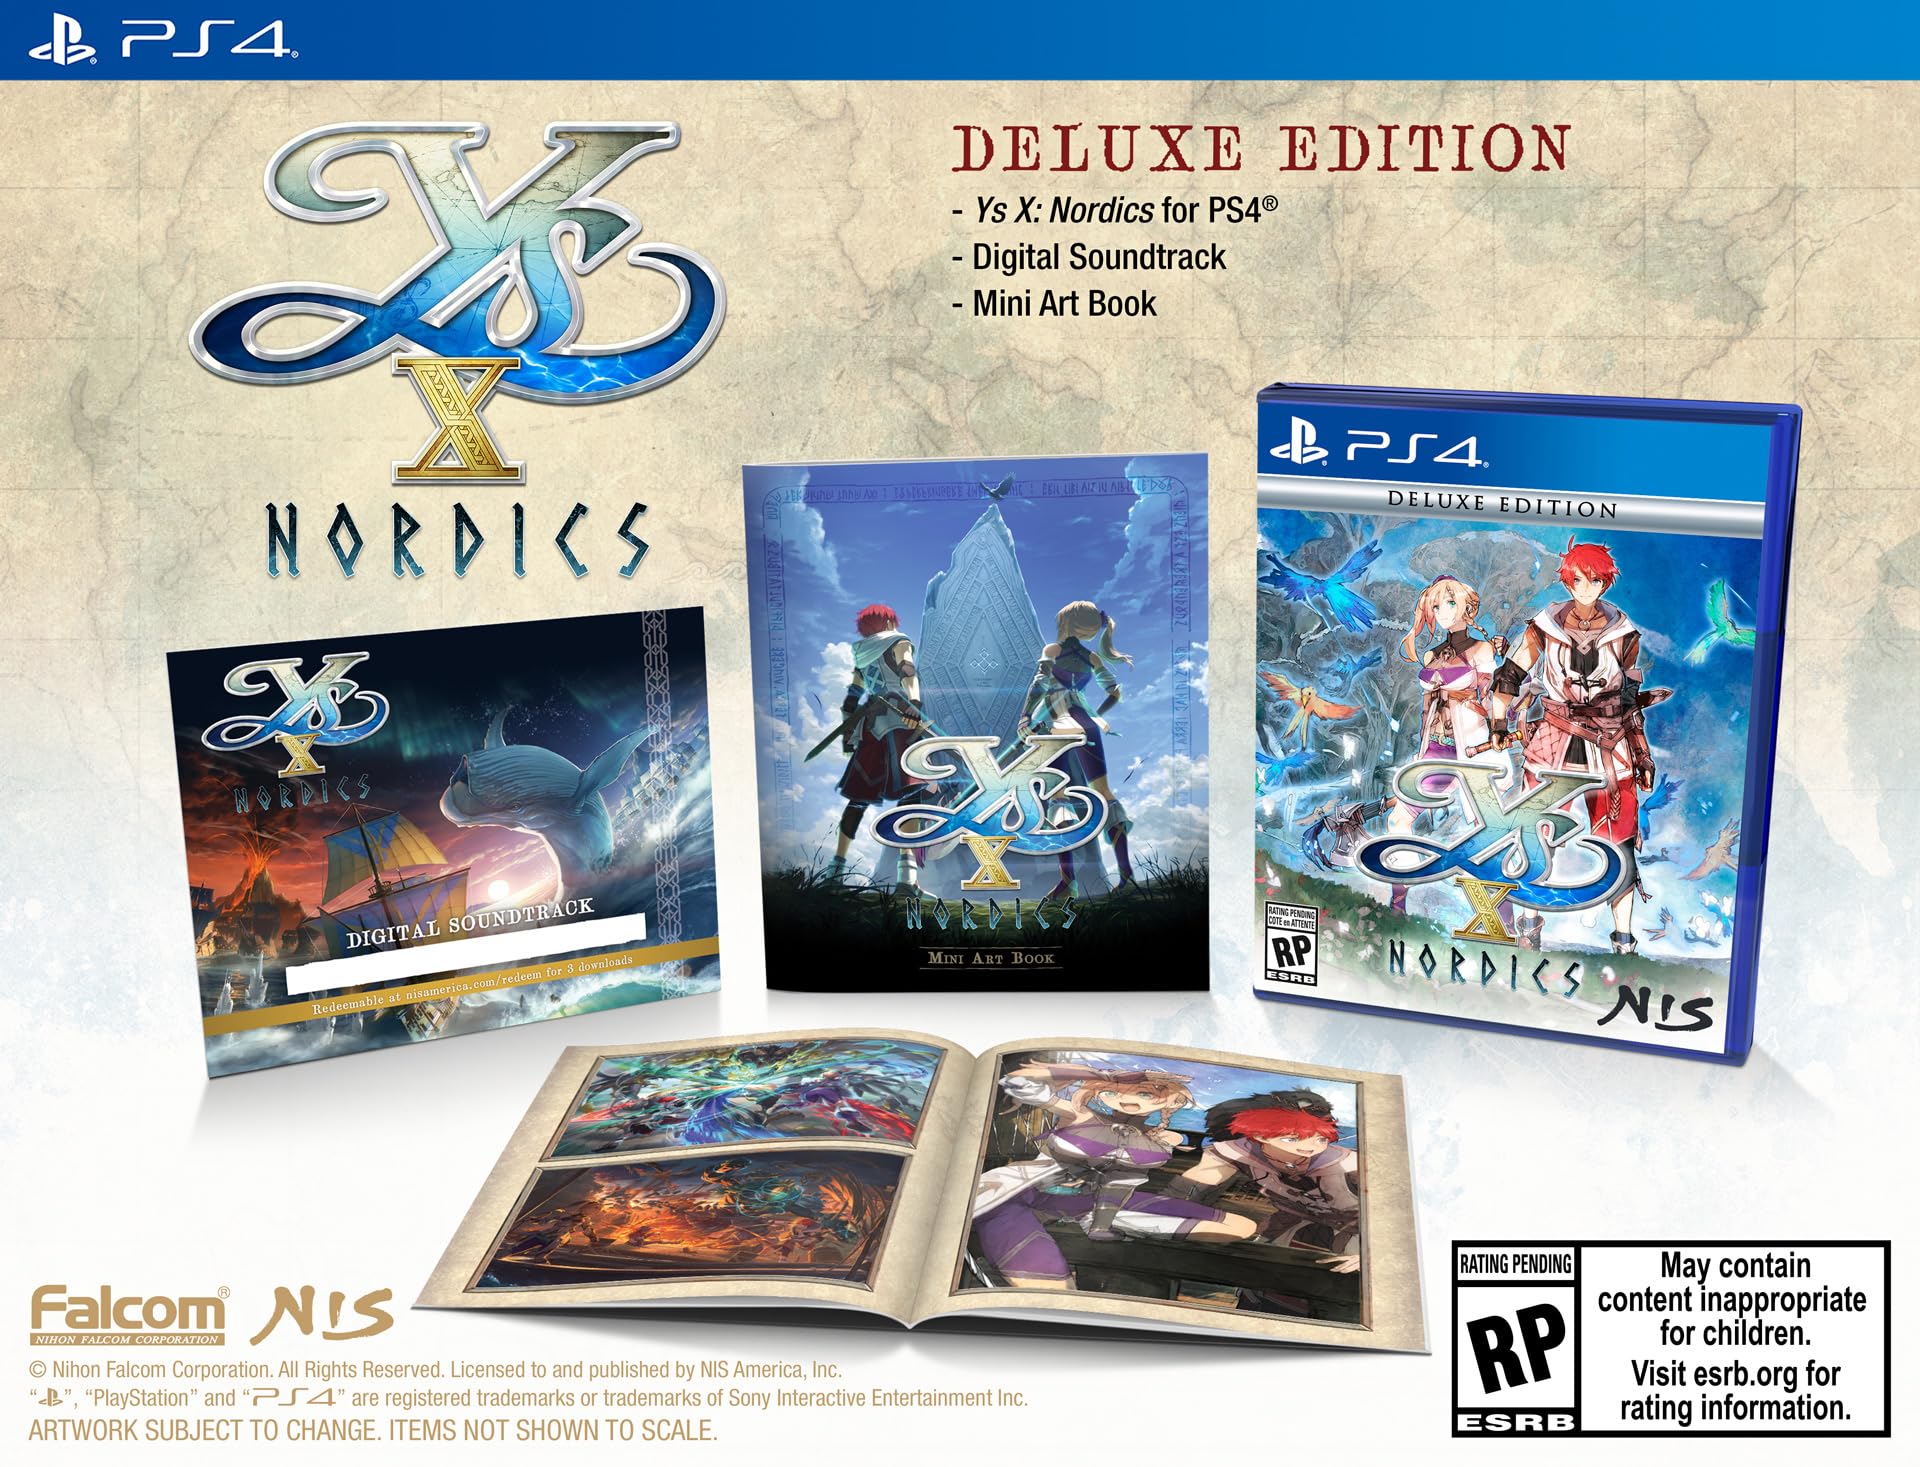 Ys X: Nordics: Deluxe Edition - PlayStation 4